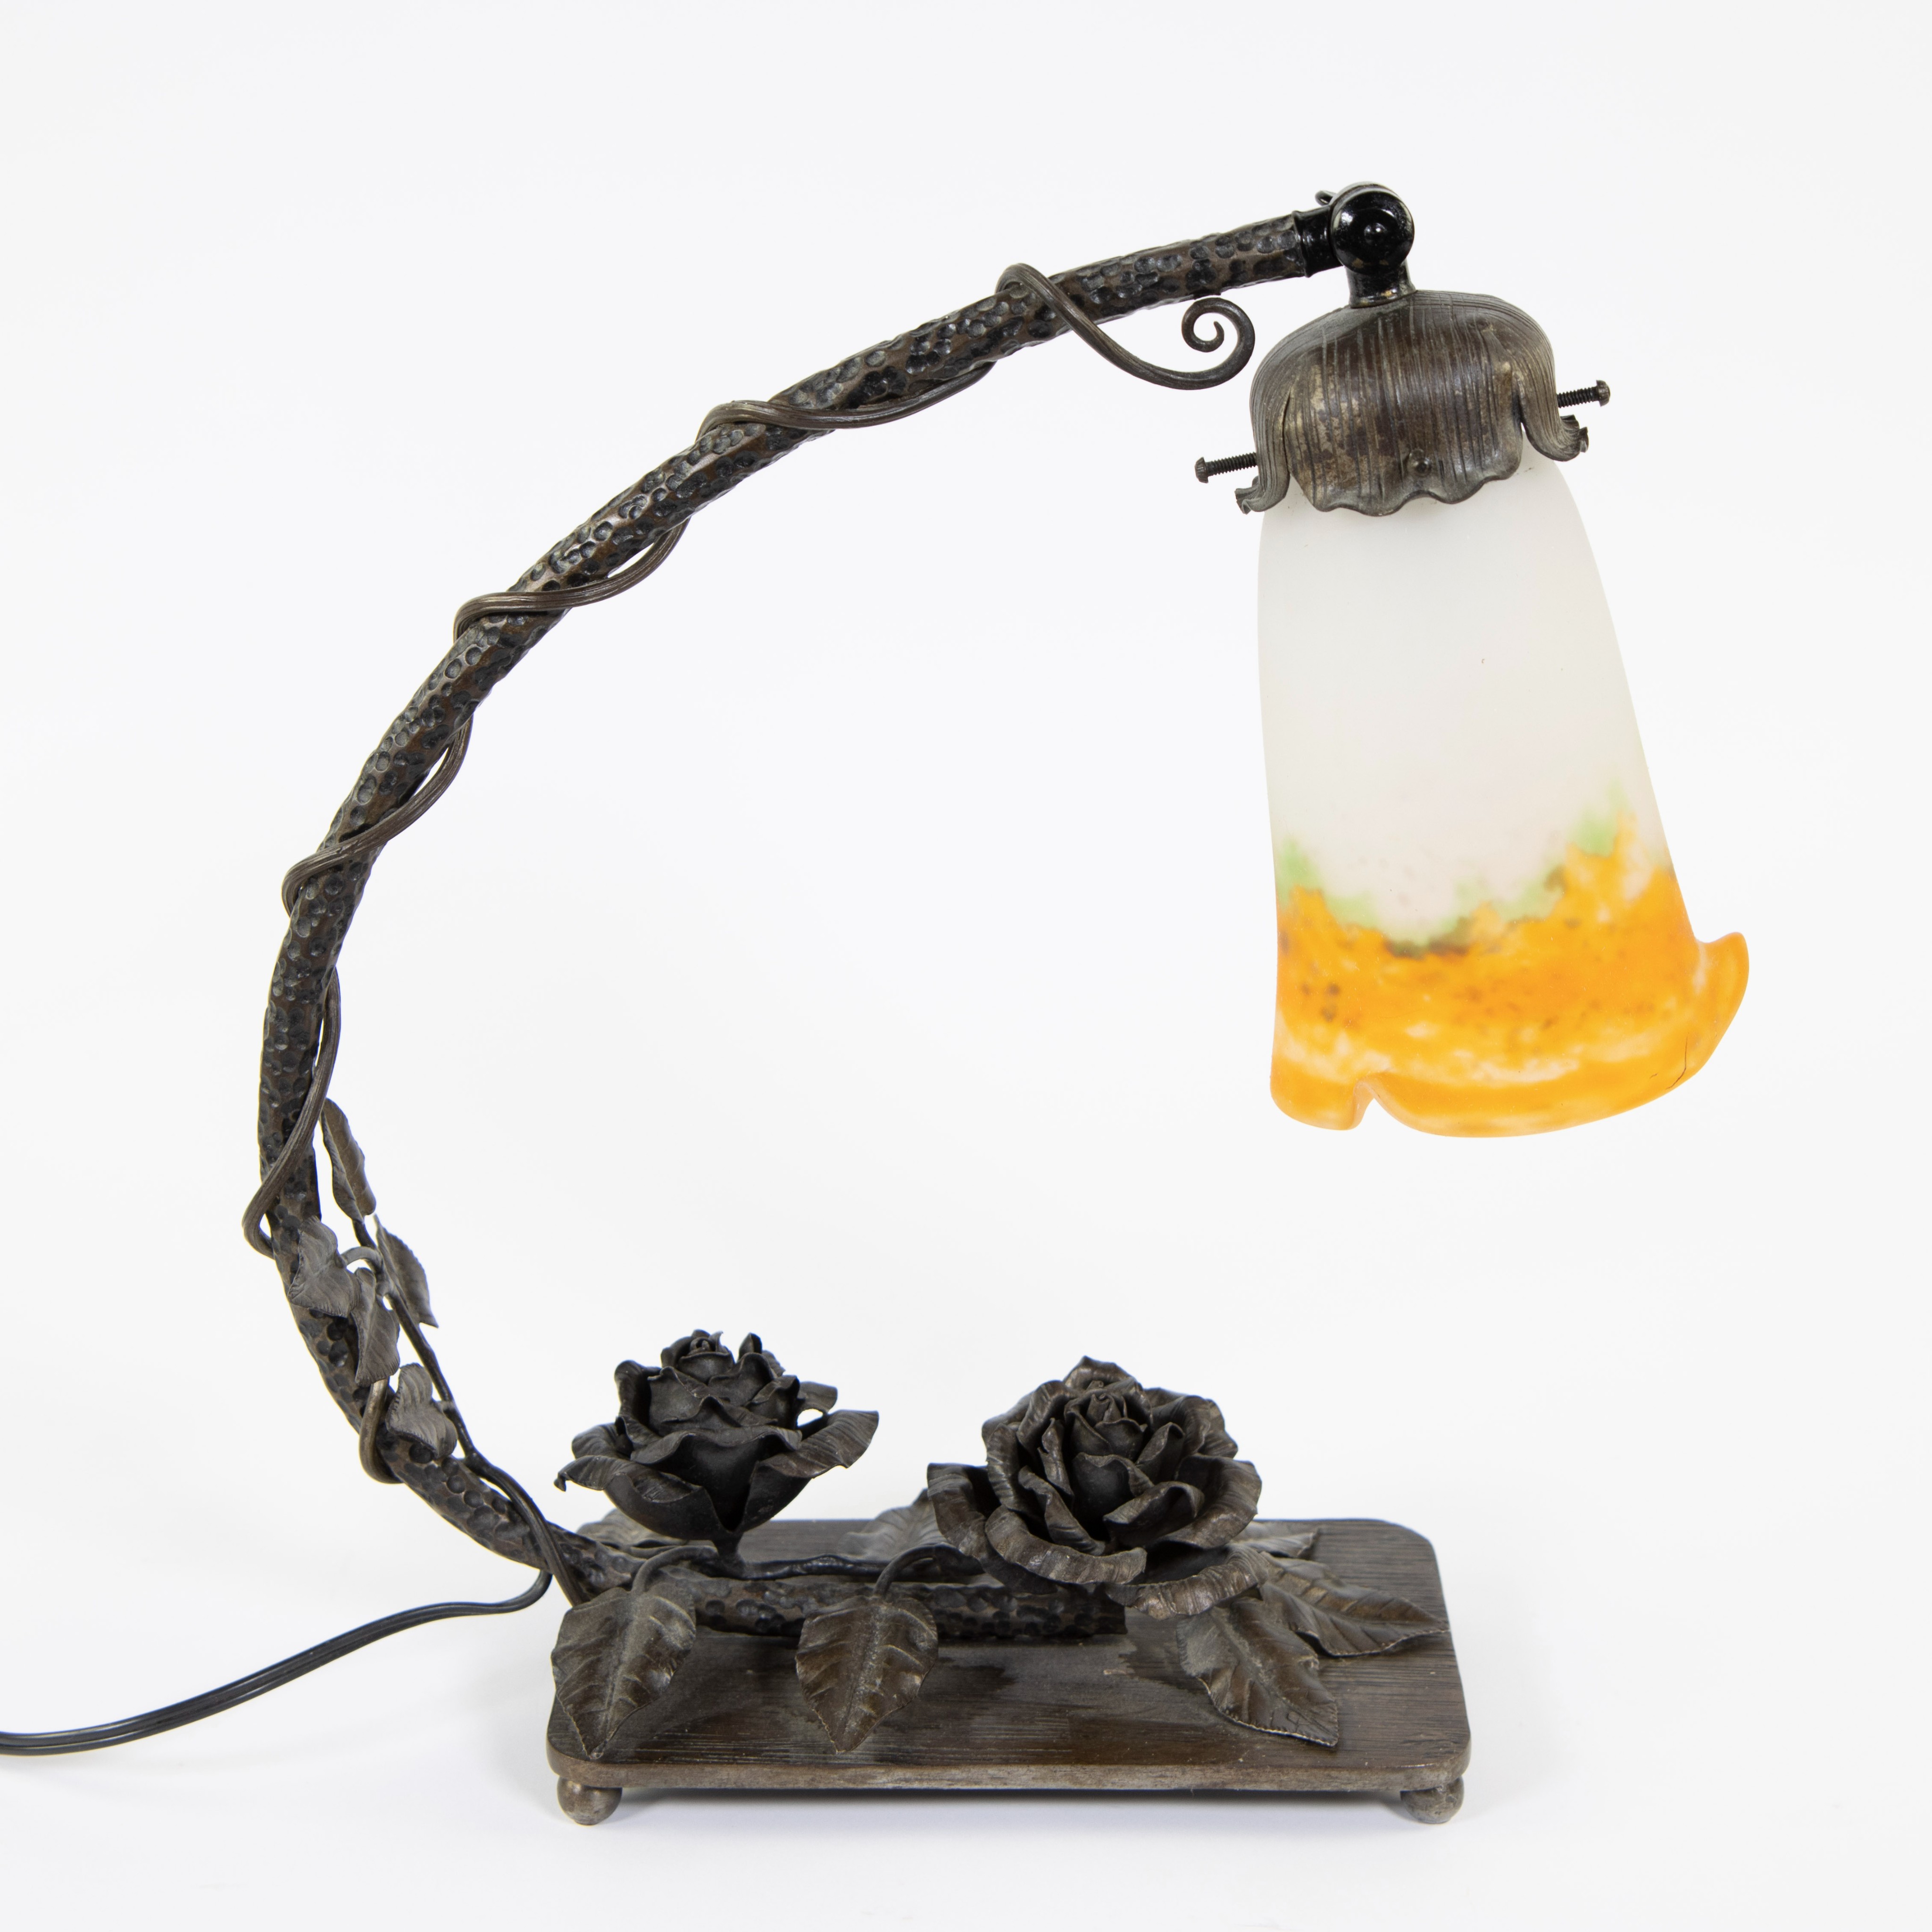 Art Deco table lamp in wrought iron with glass paste shade, circa 1920 - Image 3 of 4